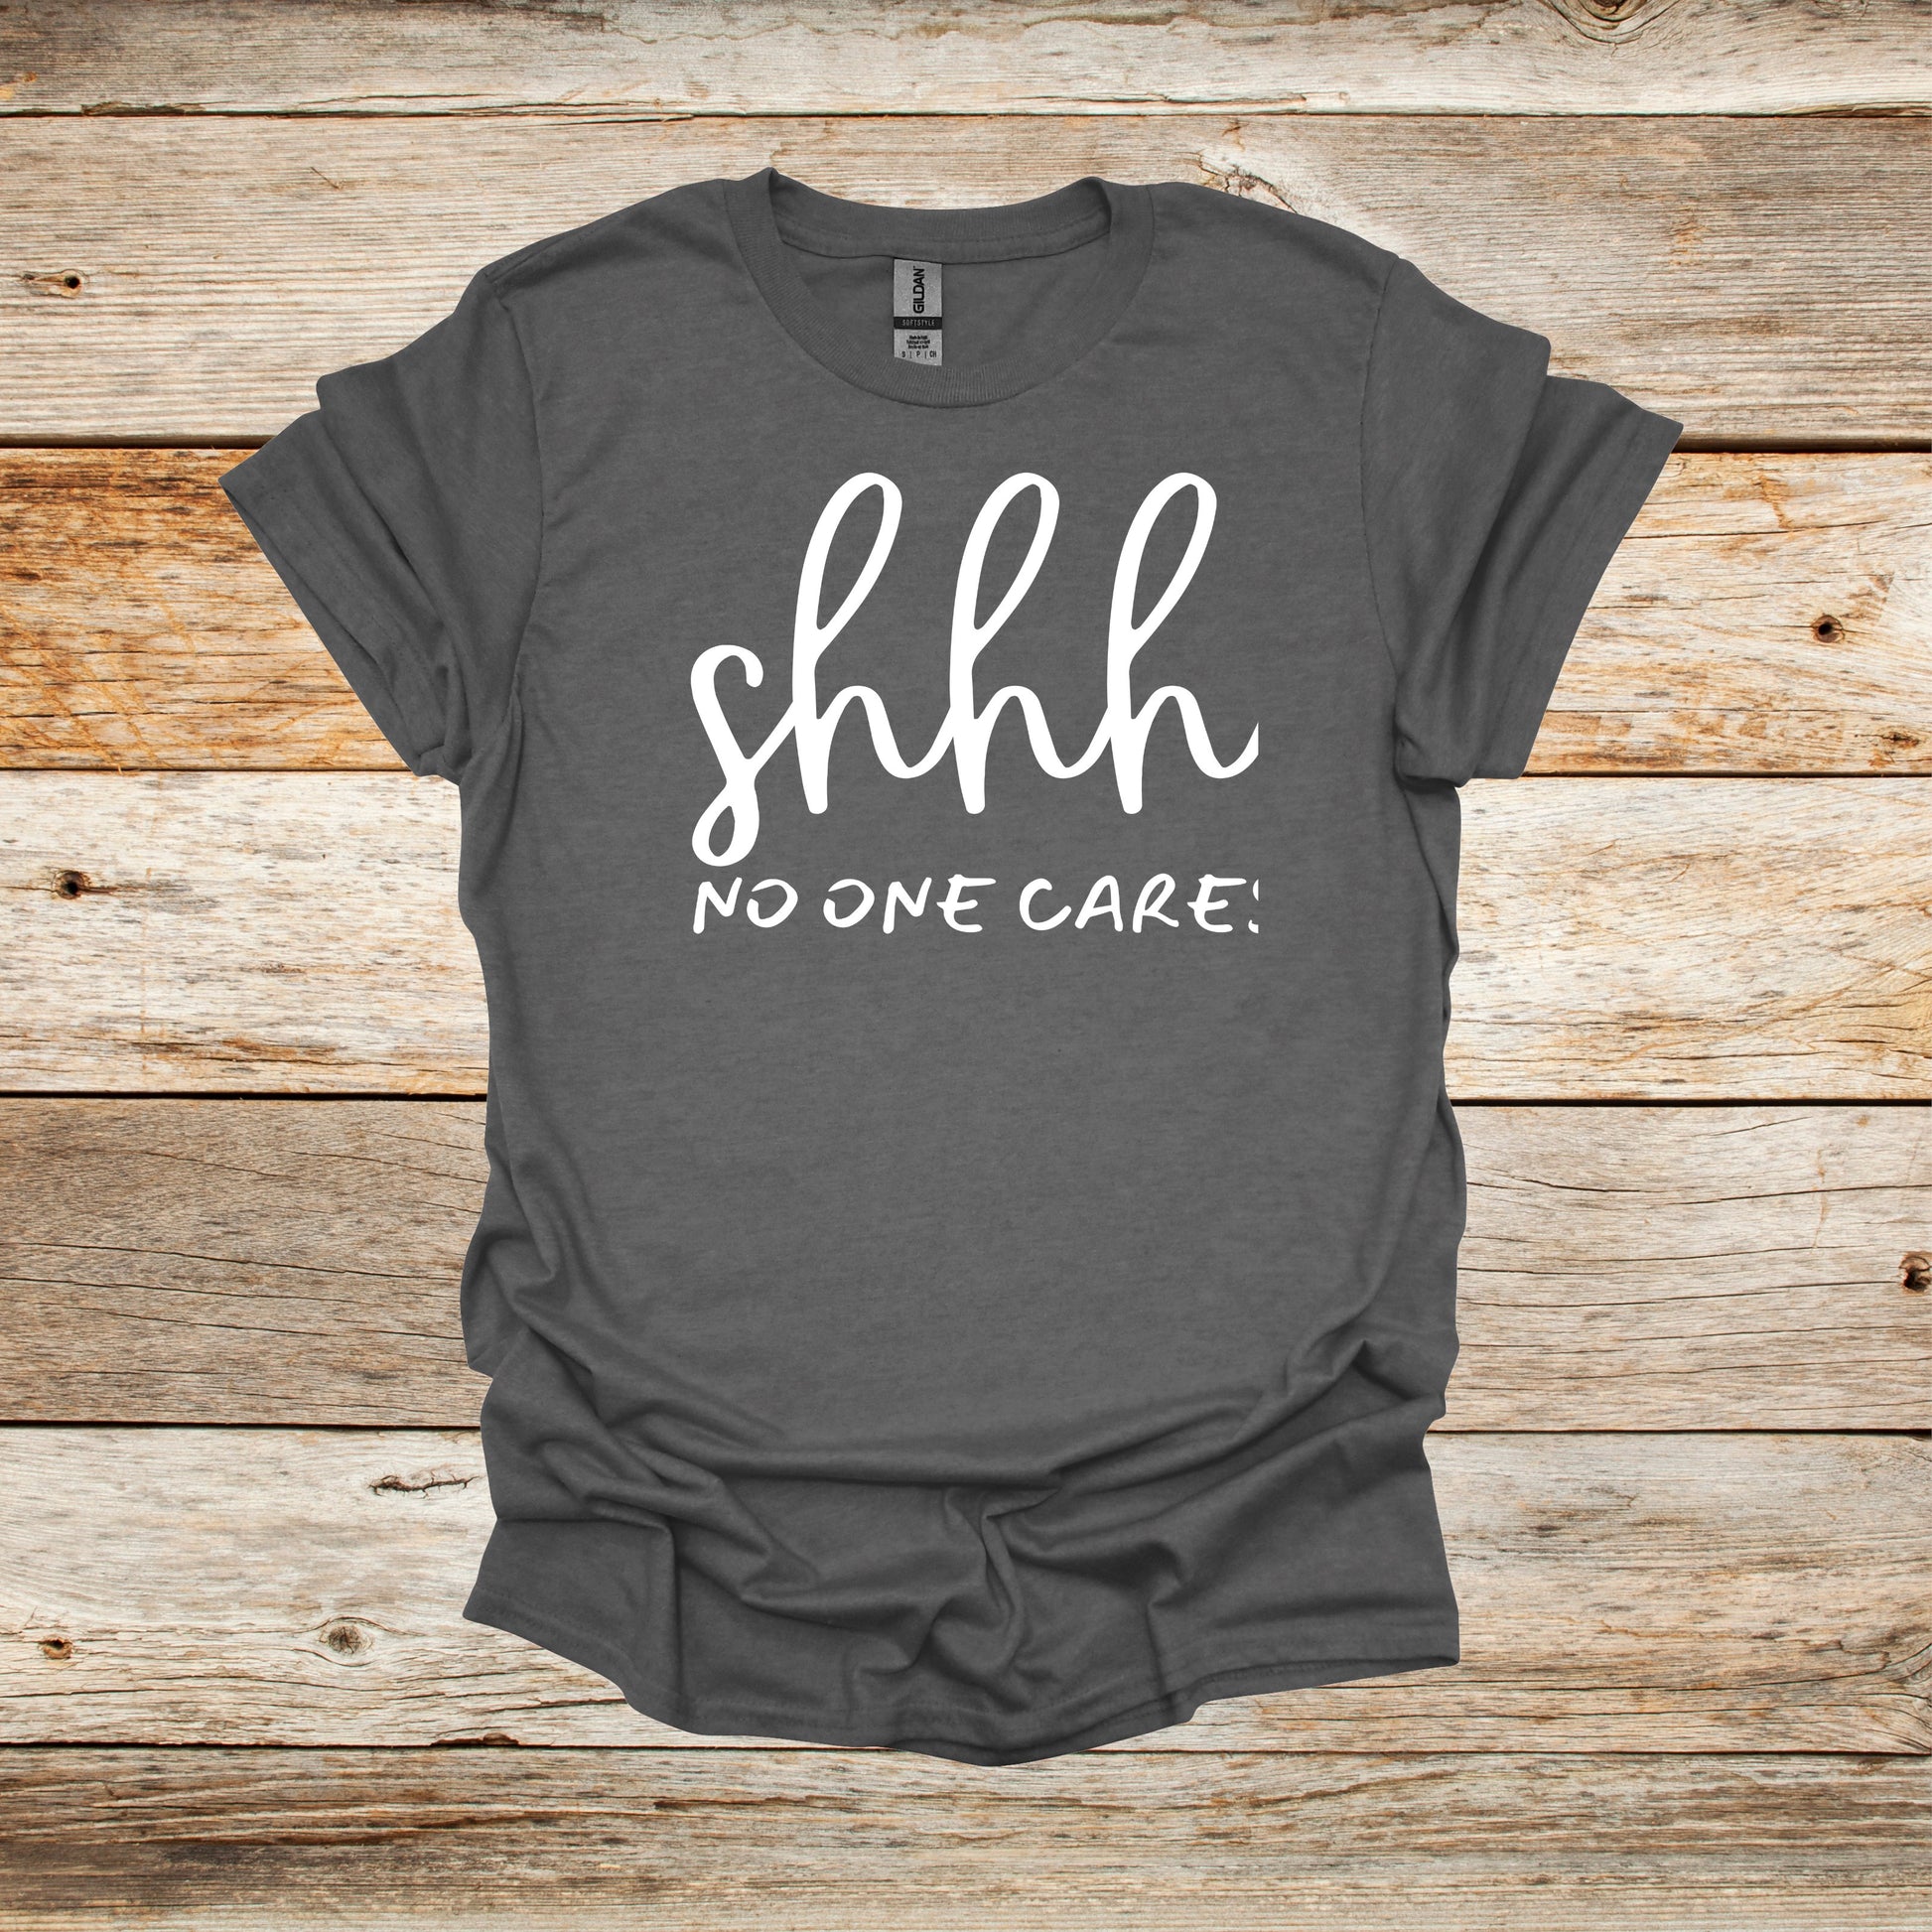 Sayings T-Shirt -Shhh No One Cares - Men's and Women's Tee Shirts - Sayings T-Shirts Graphic Avenue Graphite Heather Adult Small 